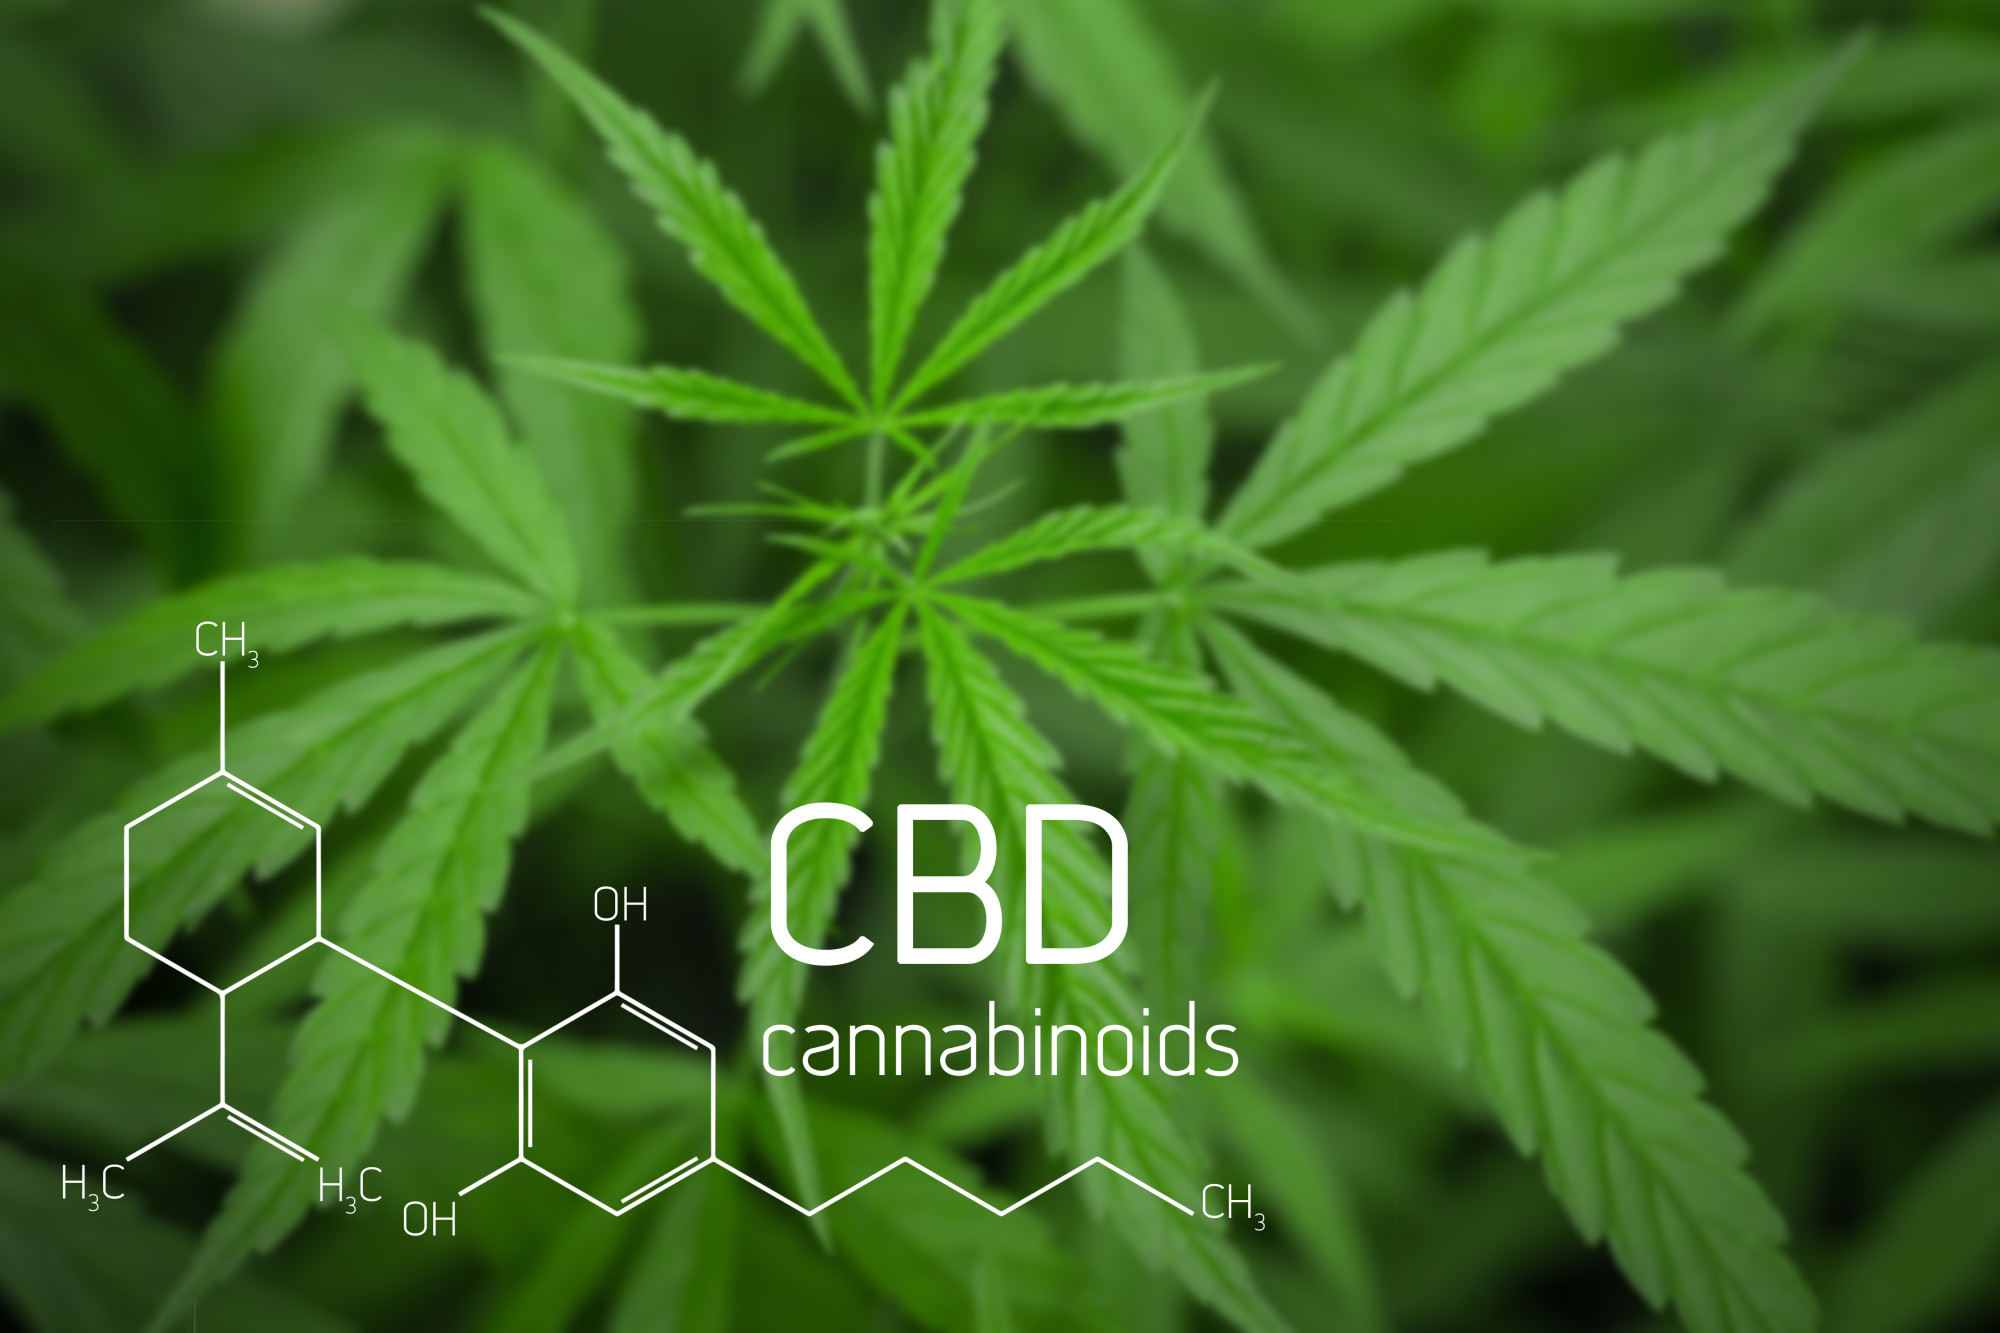 Discover the latest trends and insights in the CBD and cannabis industry